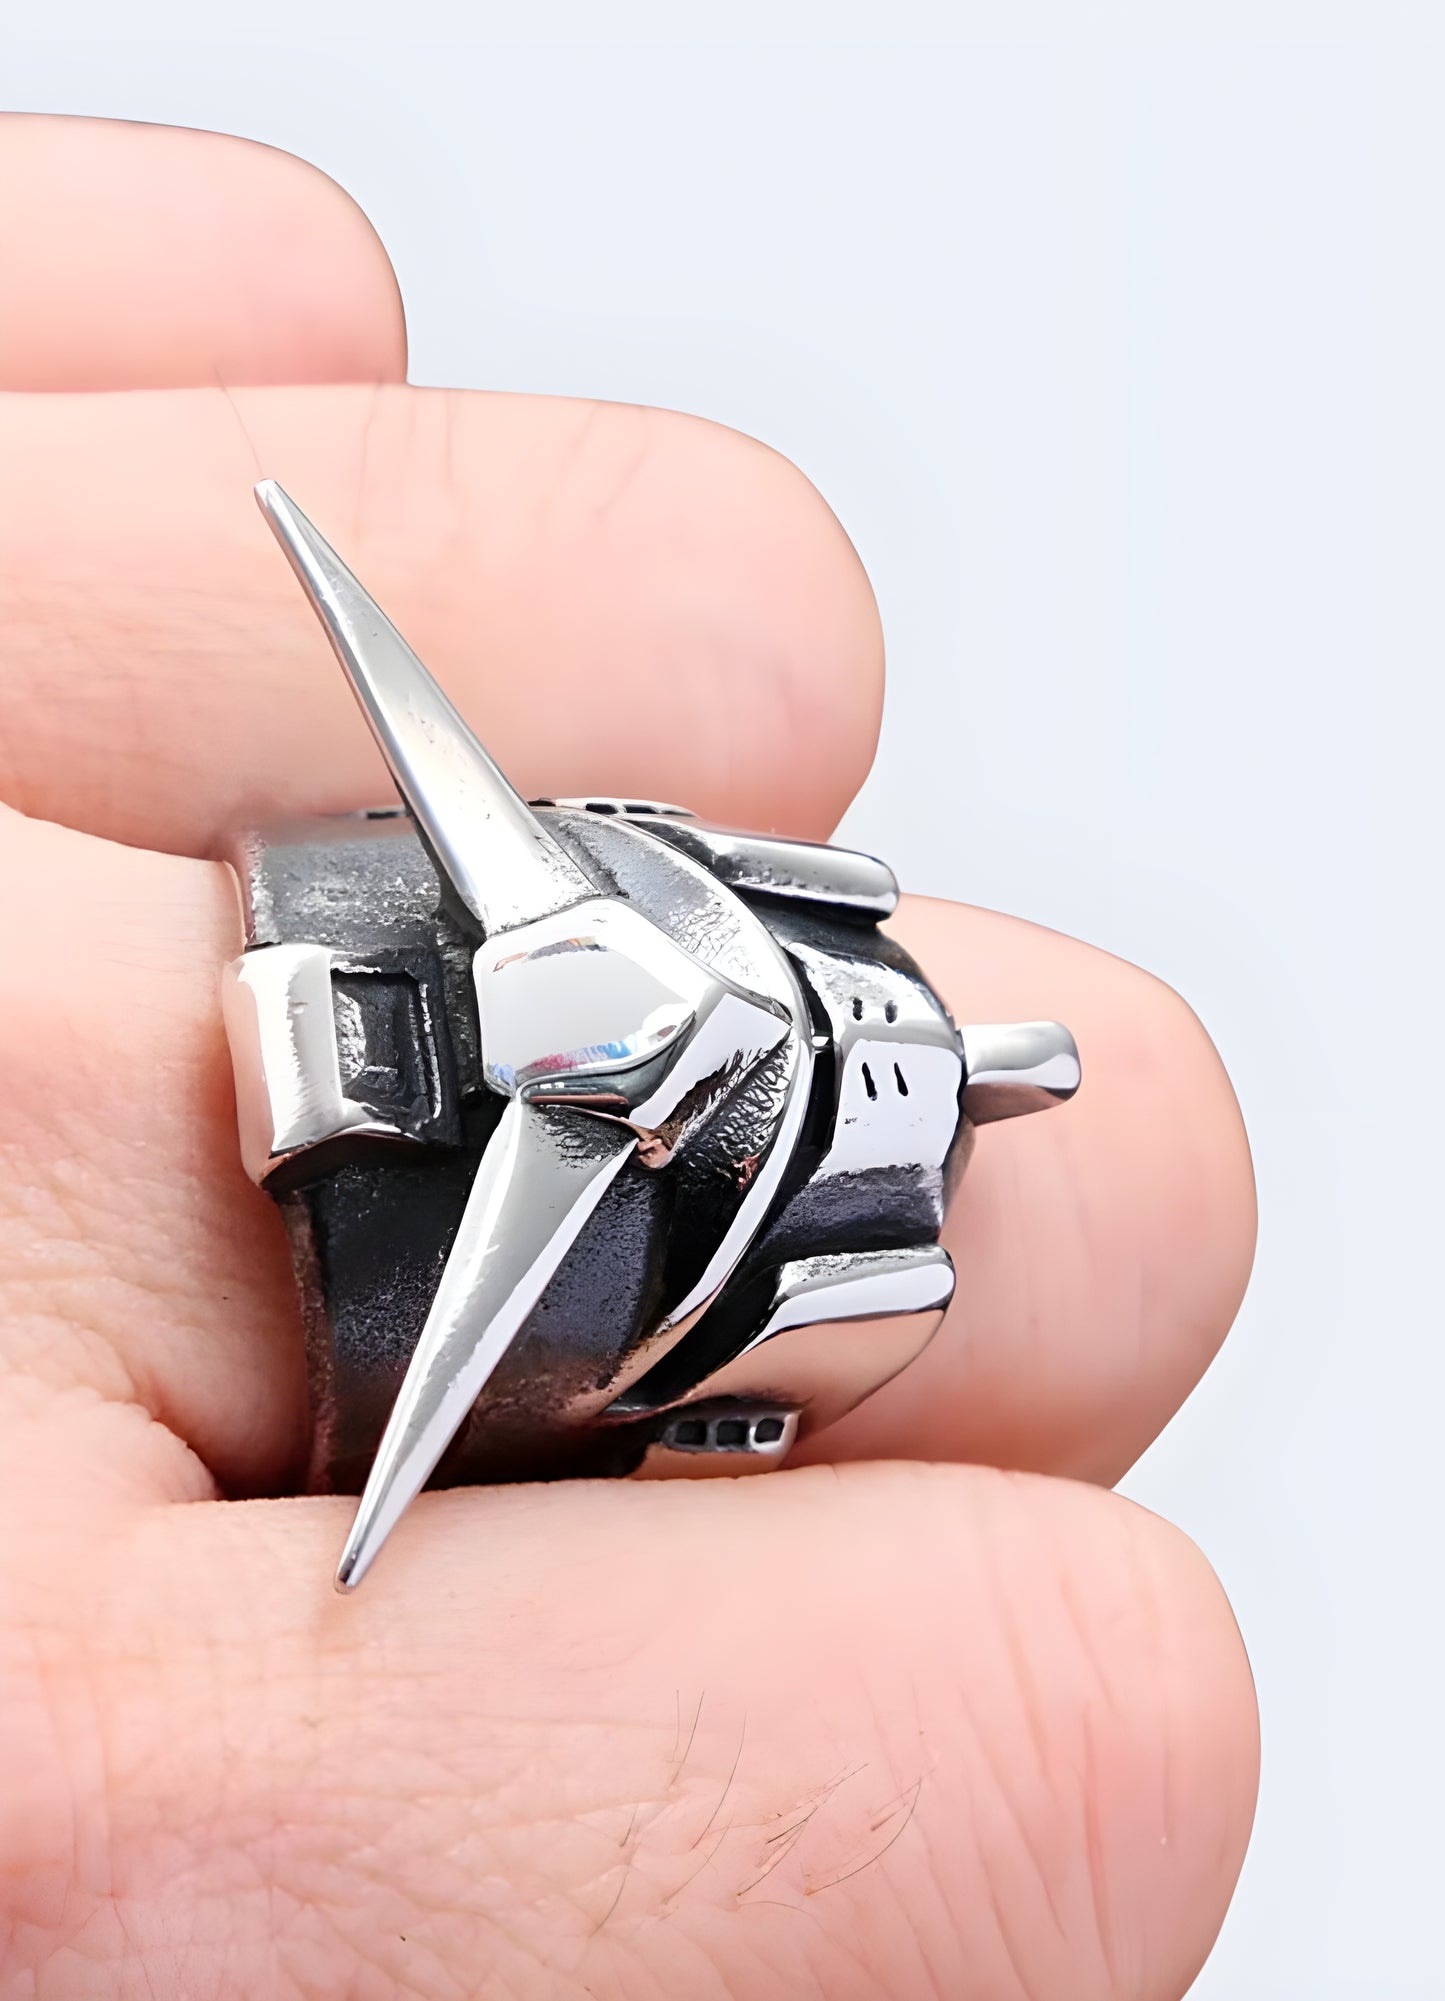 The gundam ring stands out as an emblem of where techwear converges with the evocative narrative of cyberpunk. 